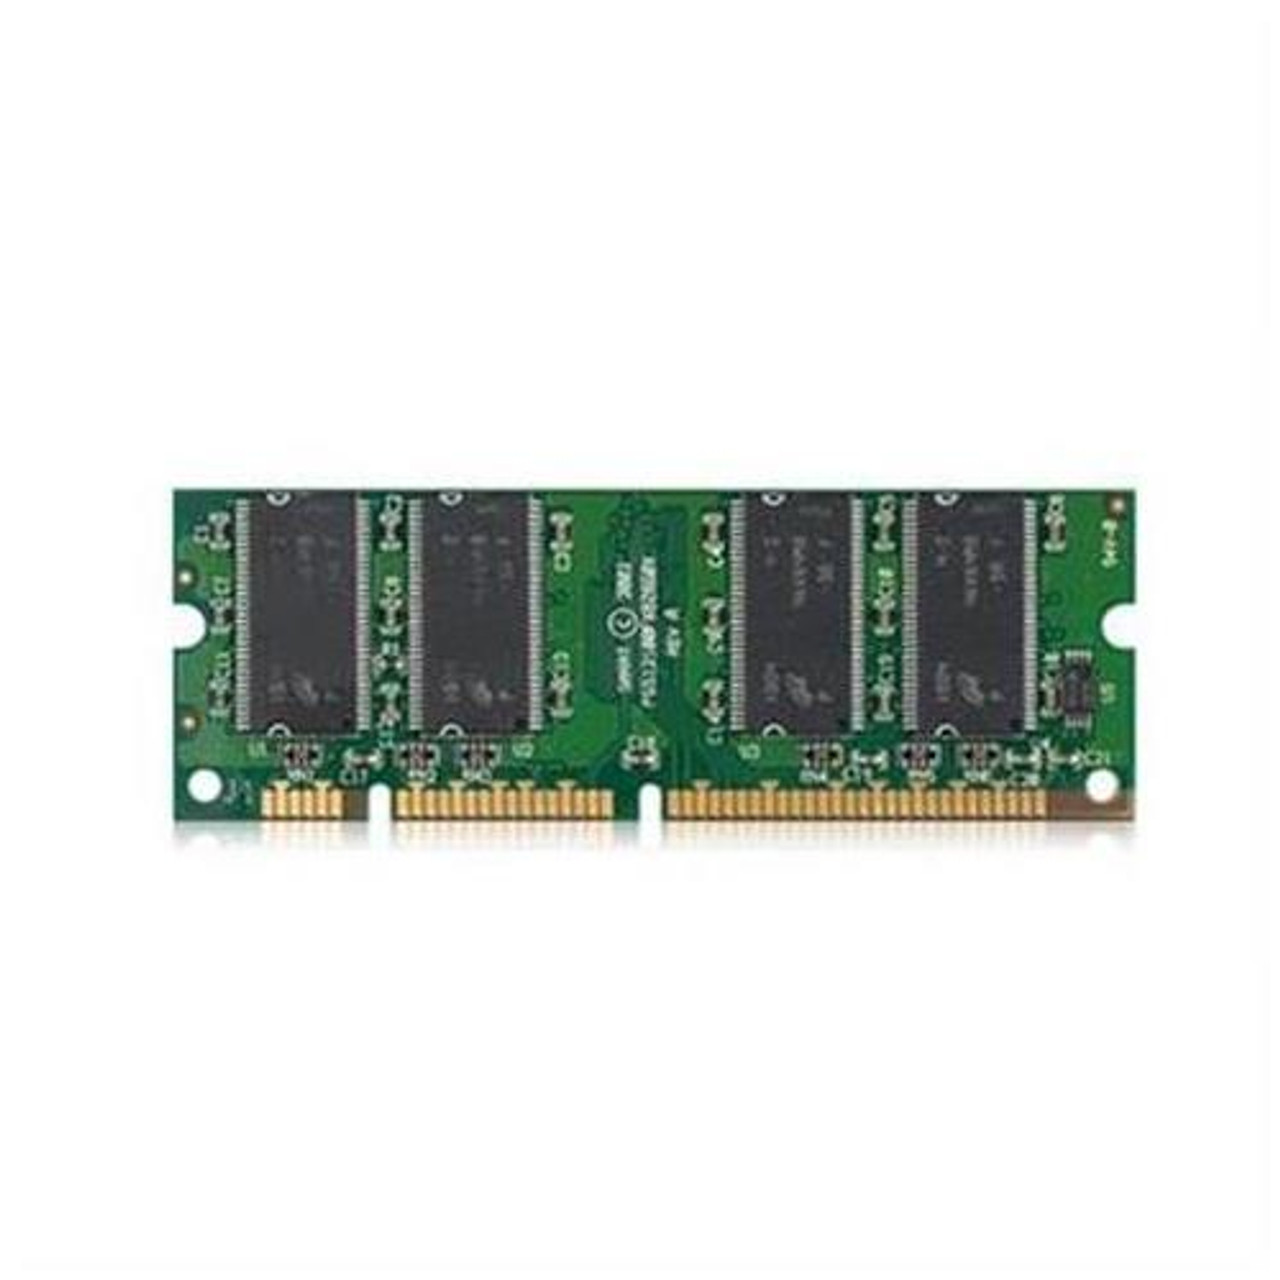 A0743432-OEM - Samsung 256MB PC2700 DDR-333MHz non-ECC Unbuffered CL2.5 100-Pin SoDimm Memory Module for 2330d 2330dn and 2330dn (Refurbished)